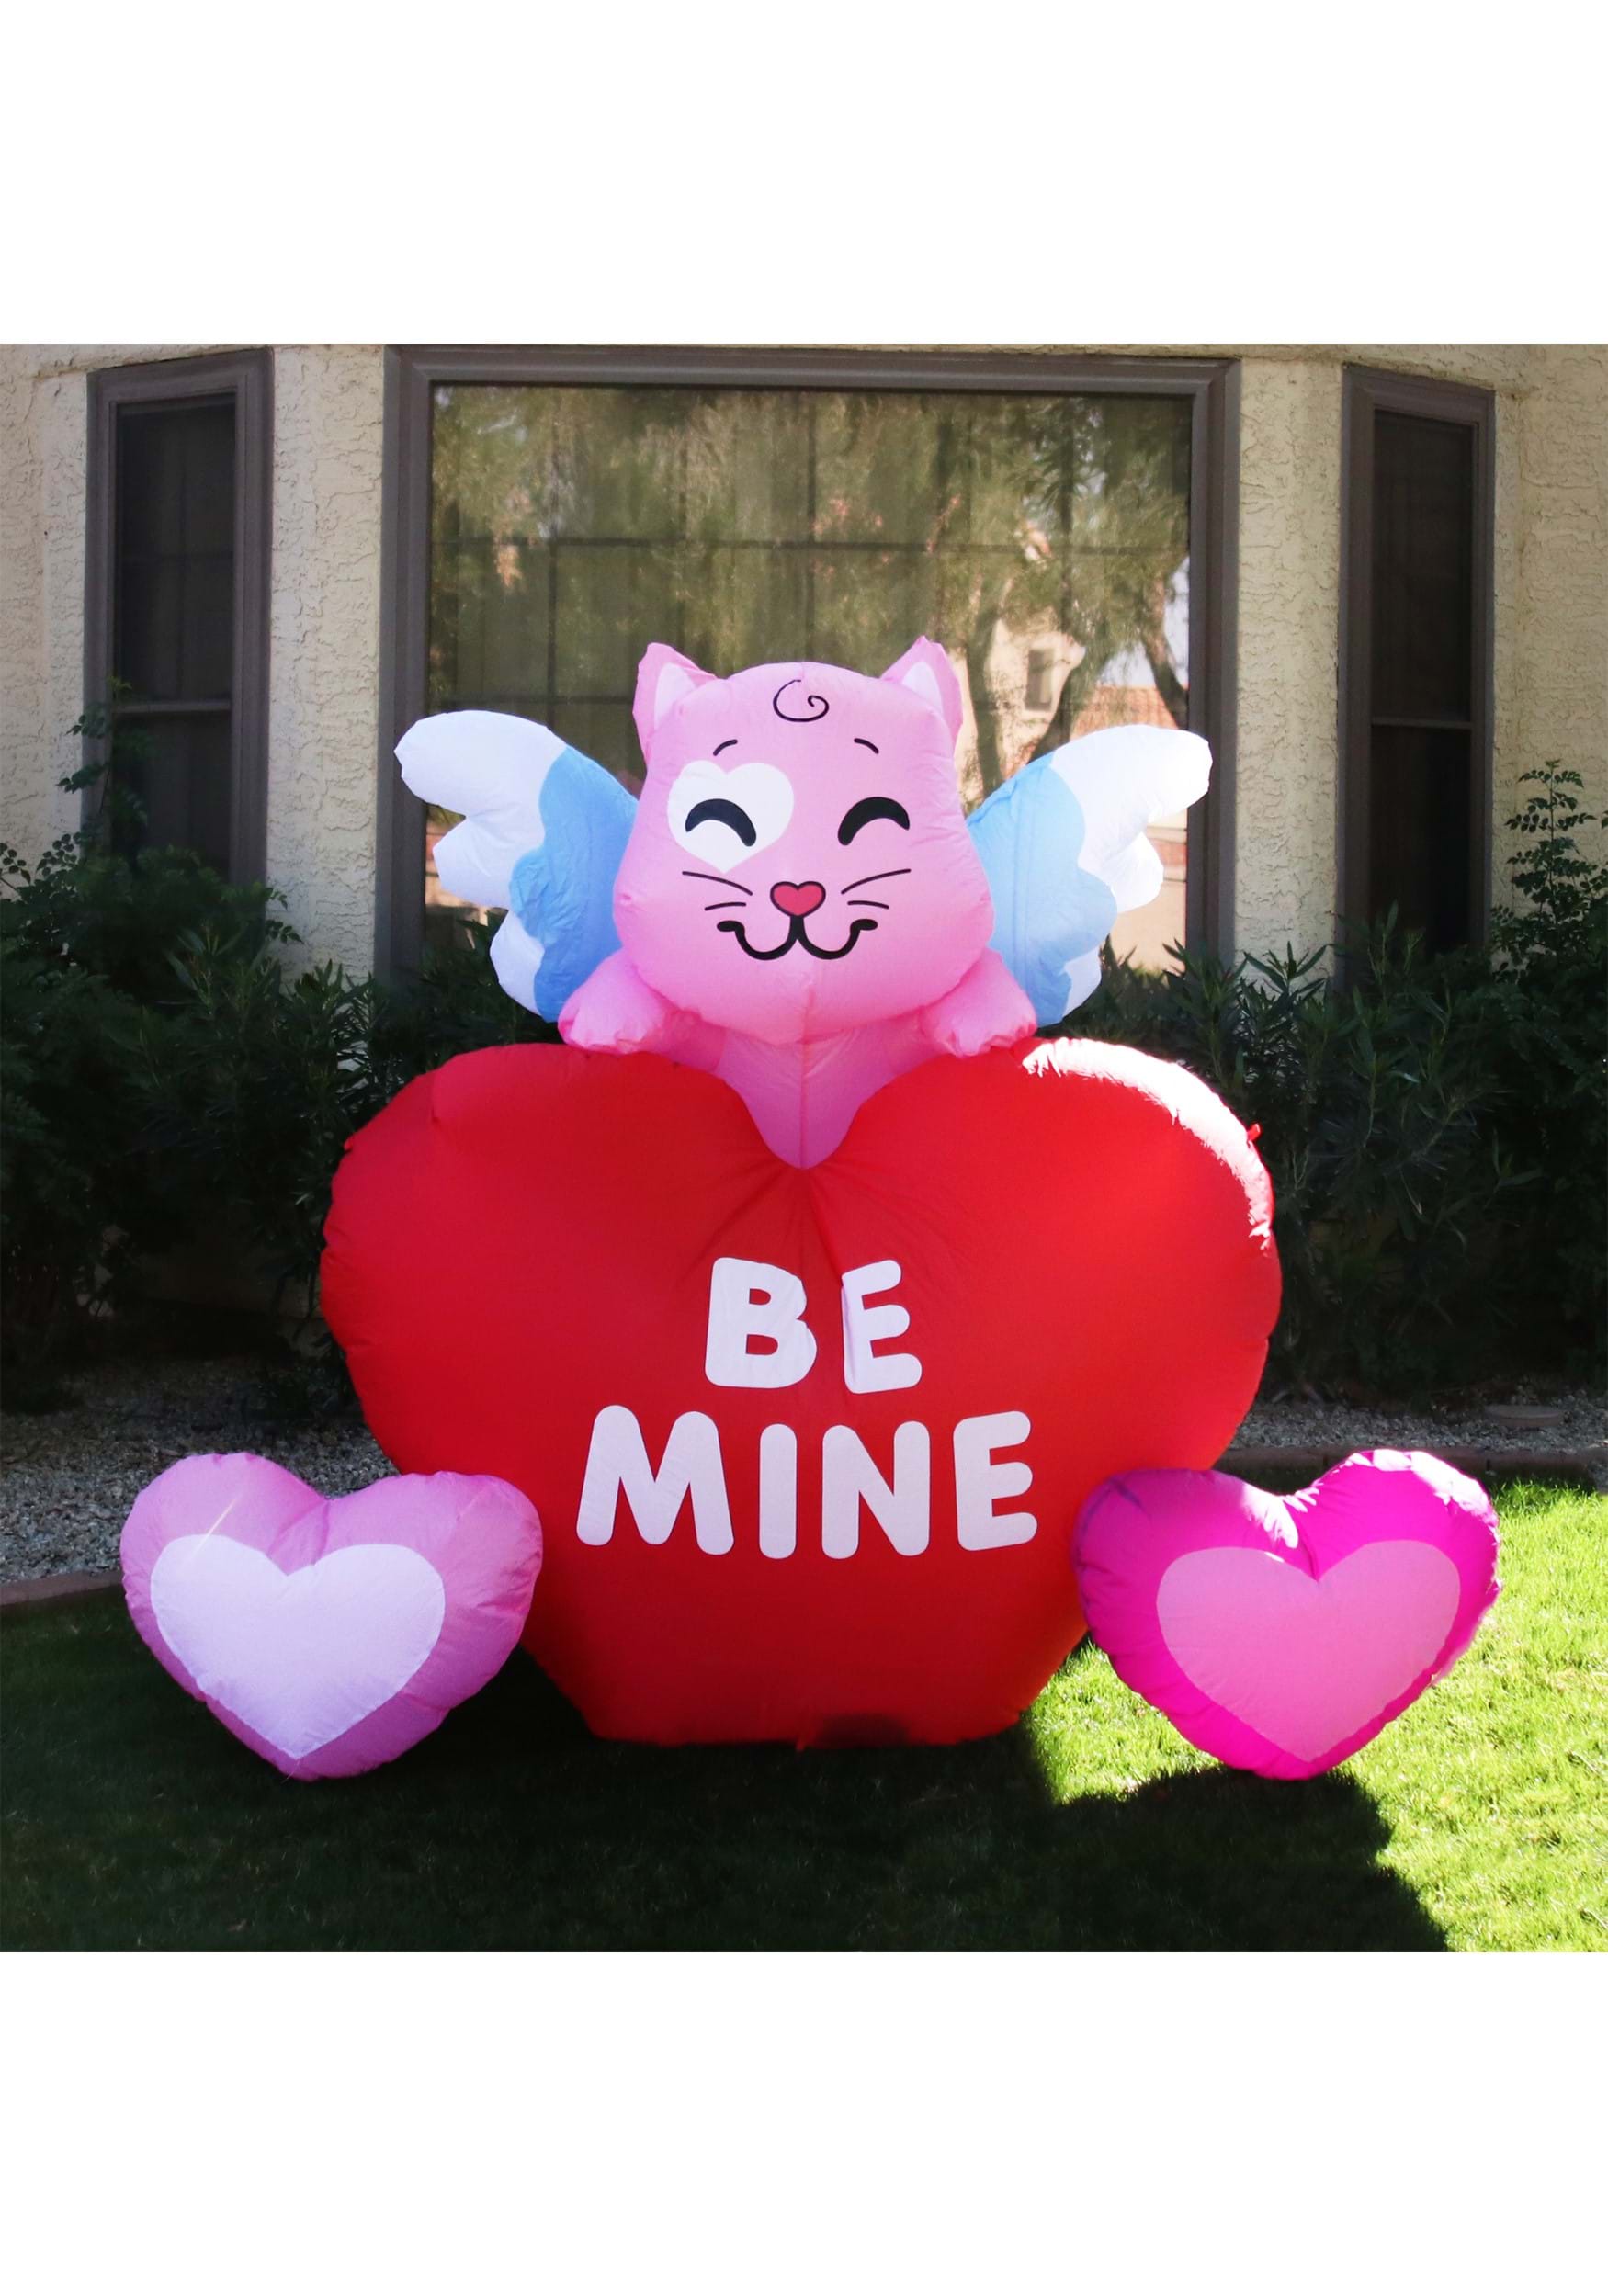 6 Foot Tall Large Kitty Angel Inflatable Decoration